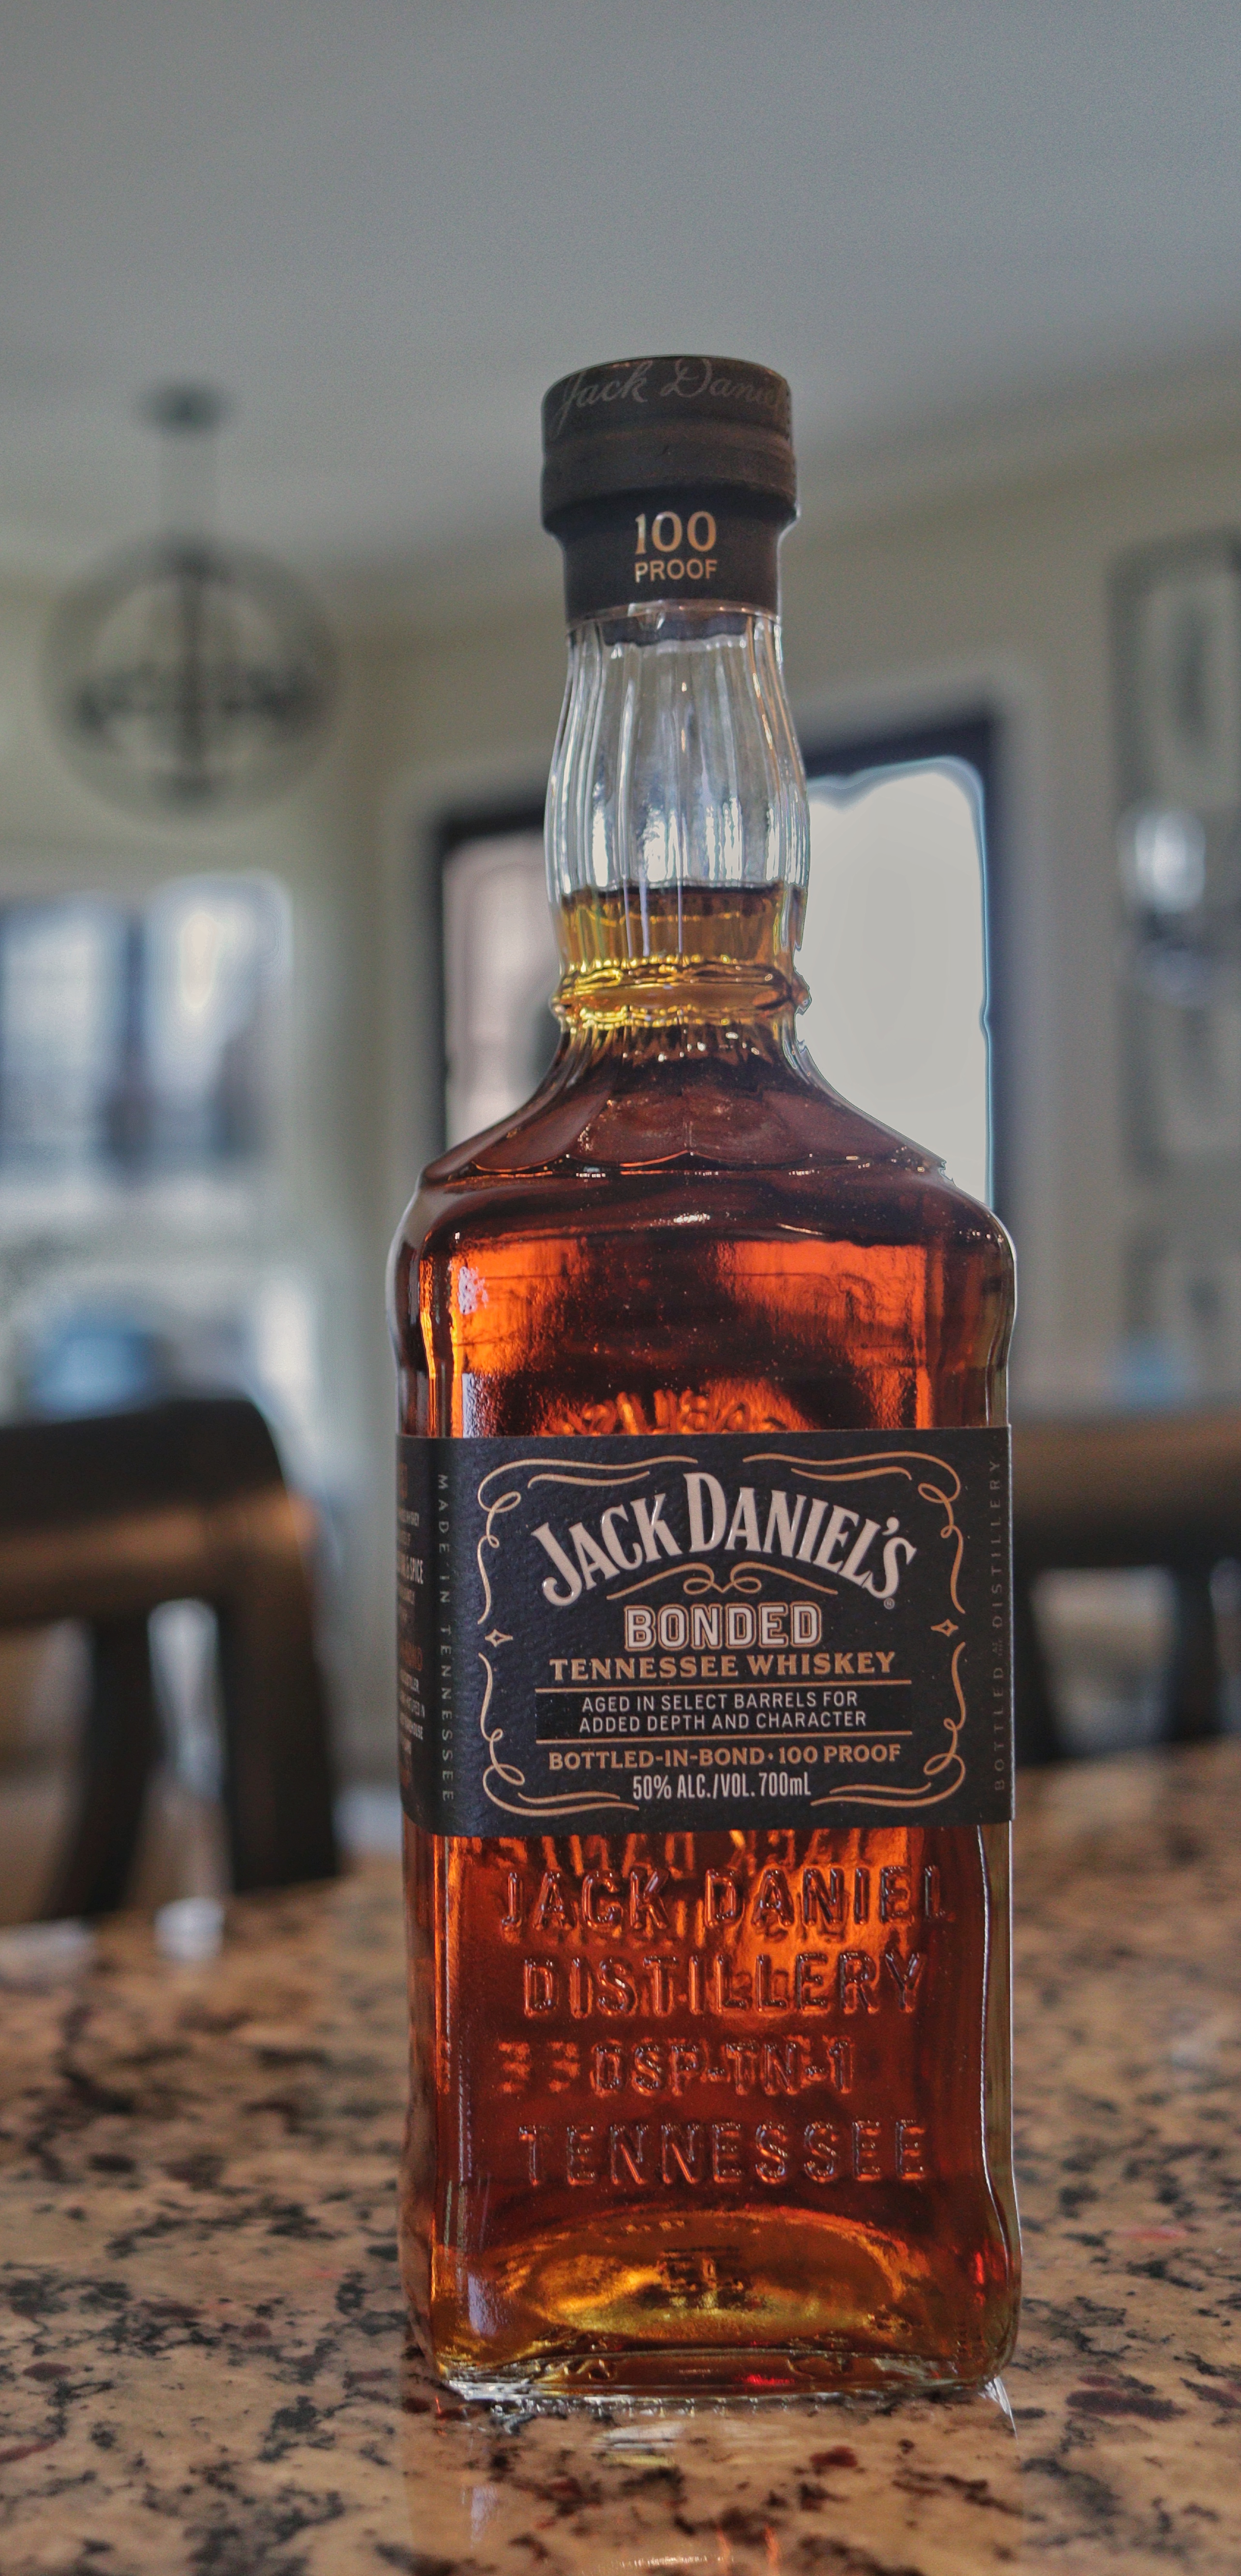 Jack Daniel's 12-Year-Old Tennessee Whiskey release details